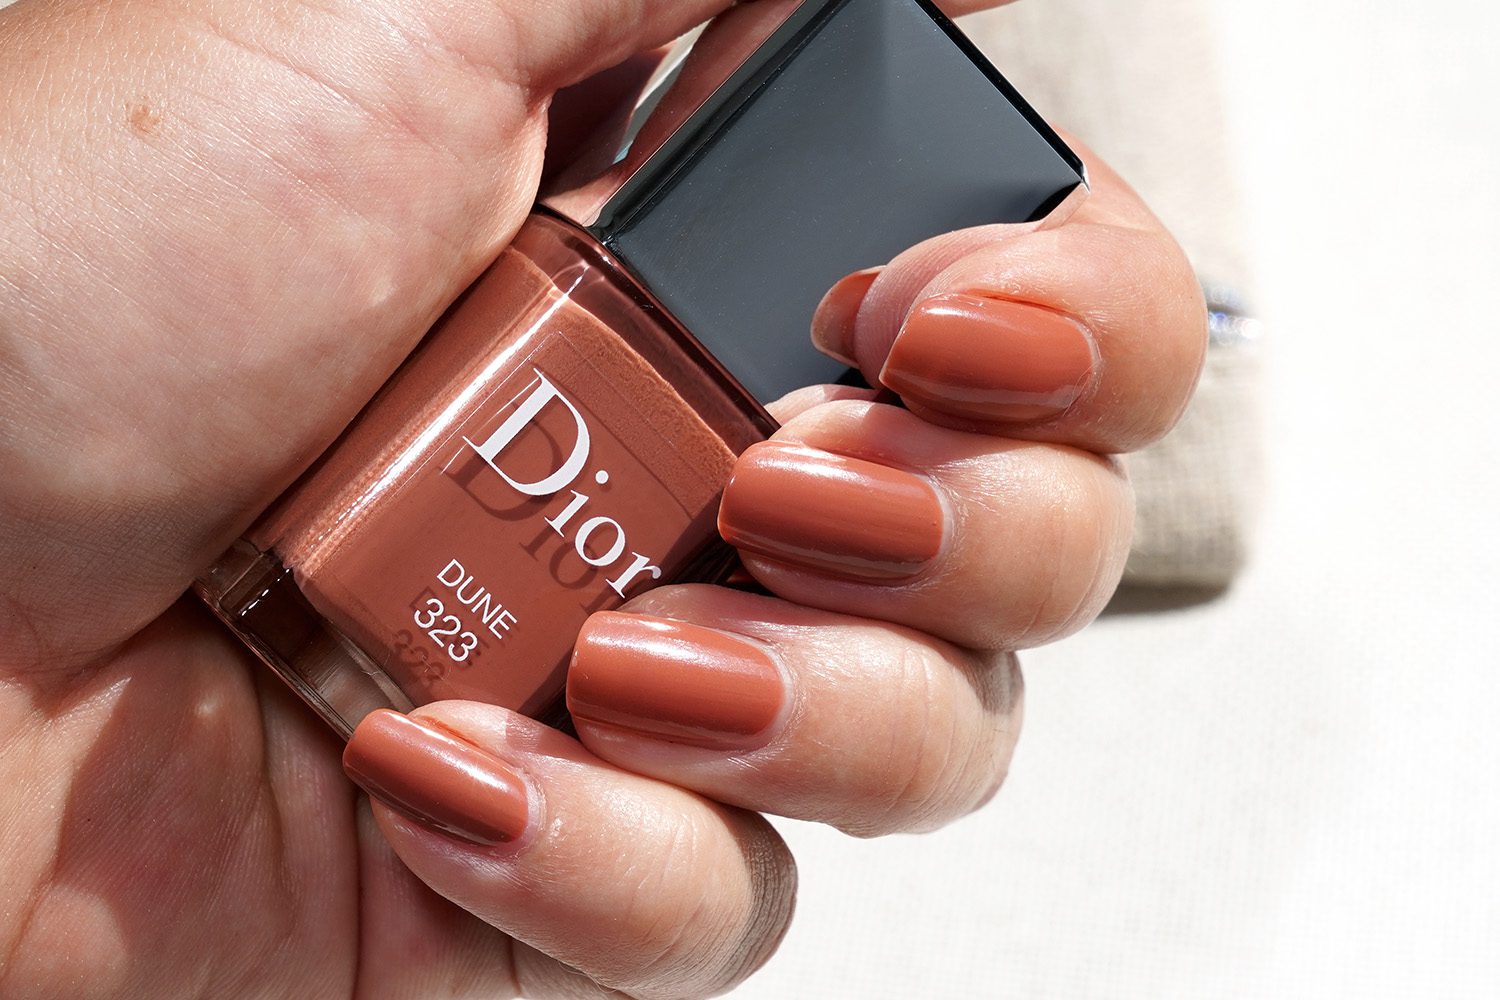 1. Dior Vernis Nail Lacquer in "New Look" - wide 7